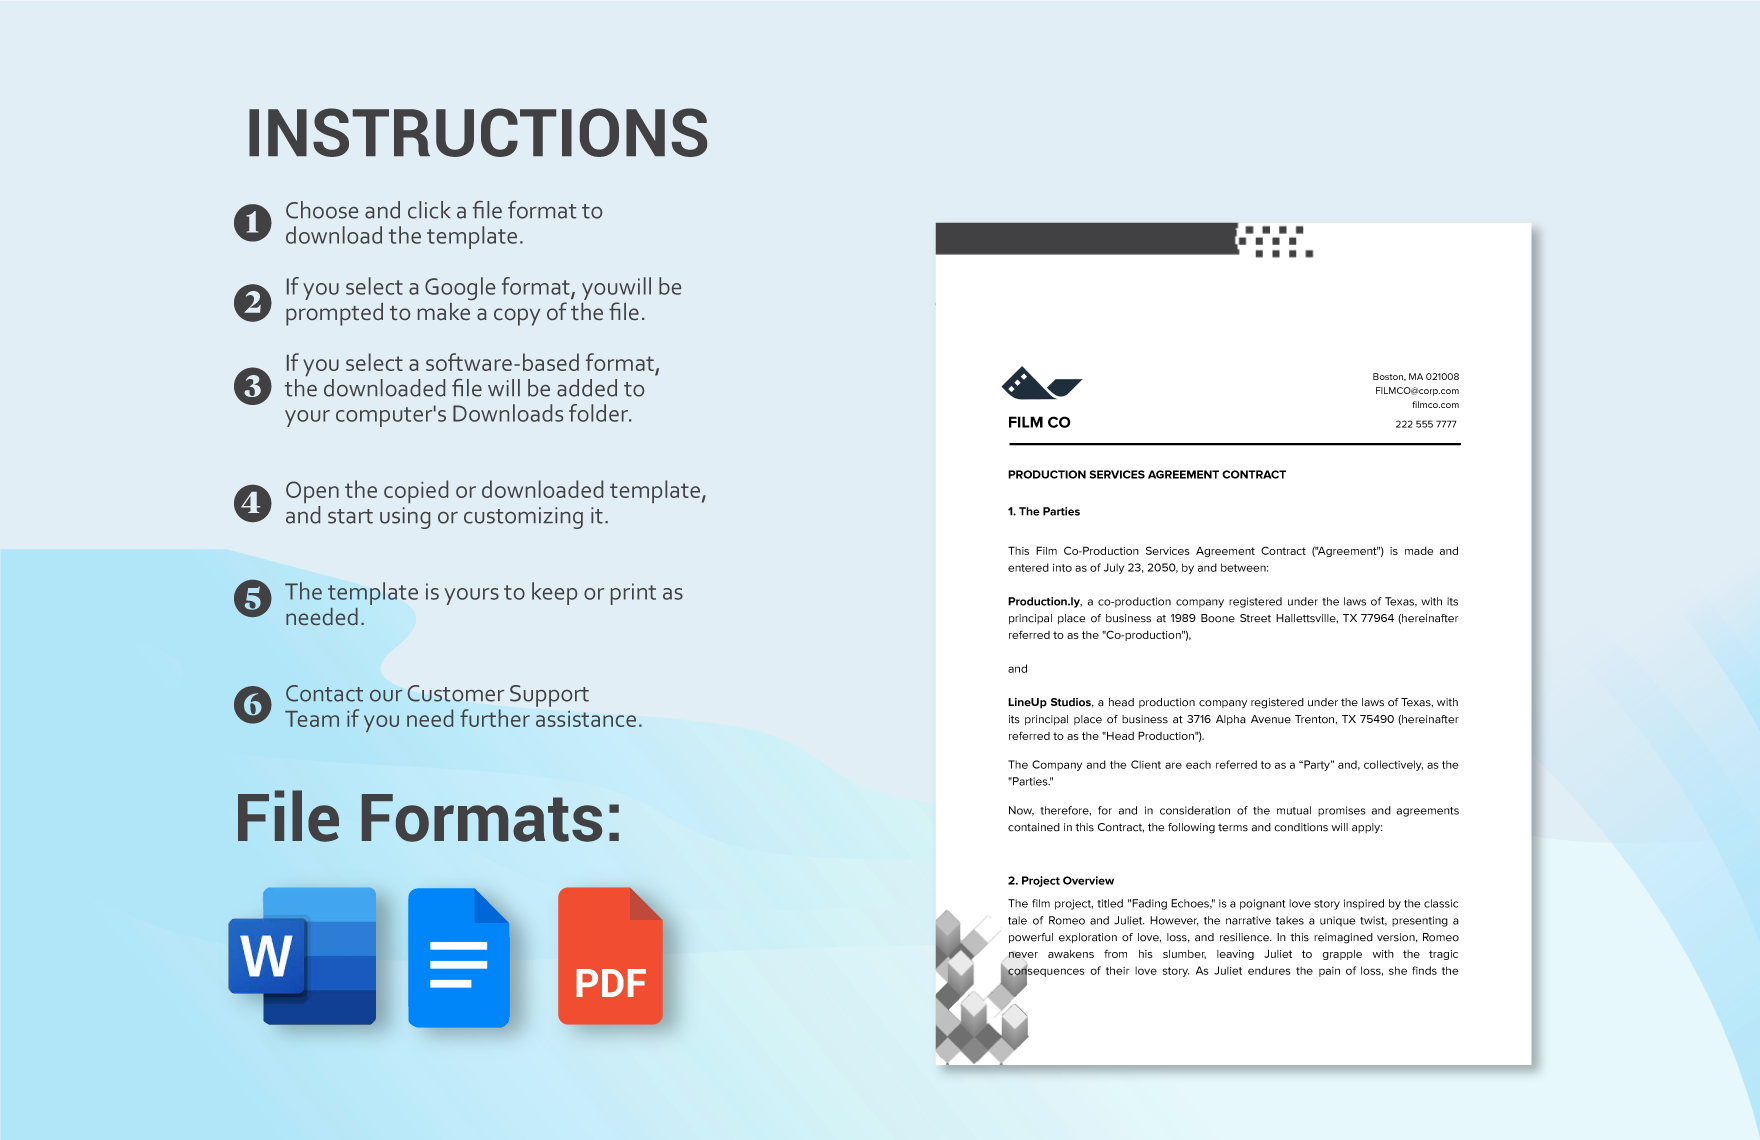 Film Co Production Services Agreement Contract Template